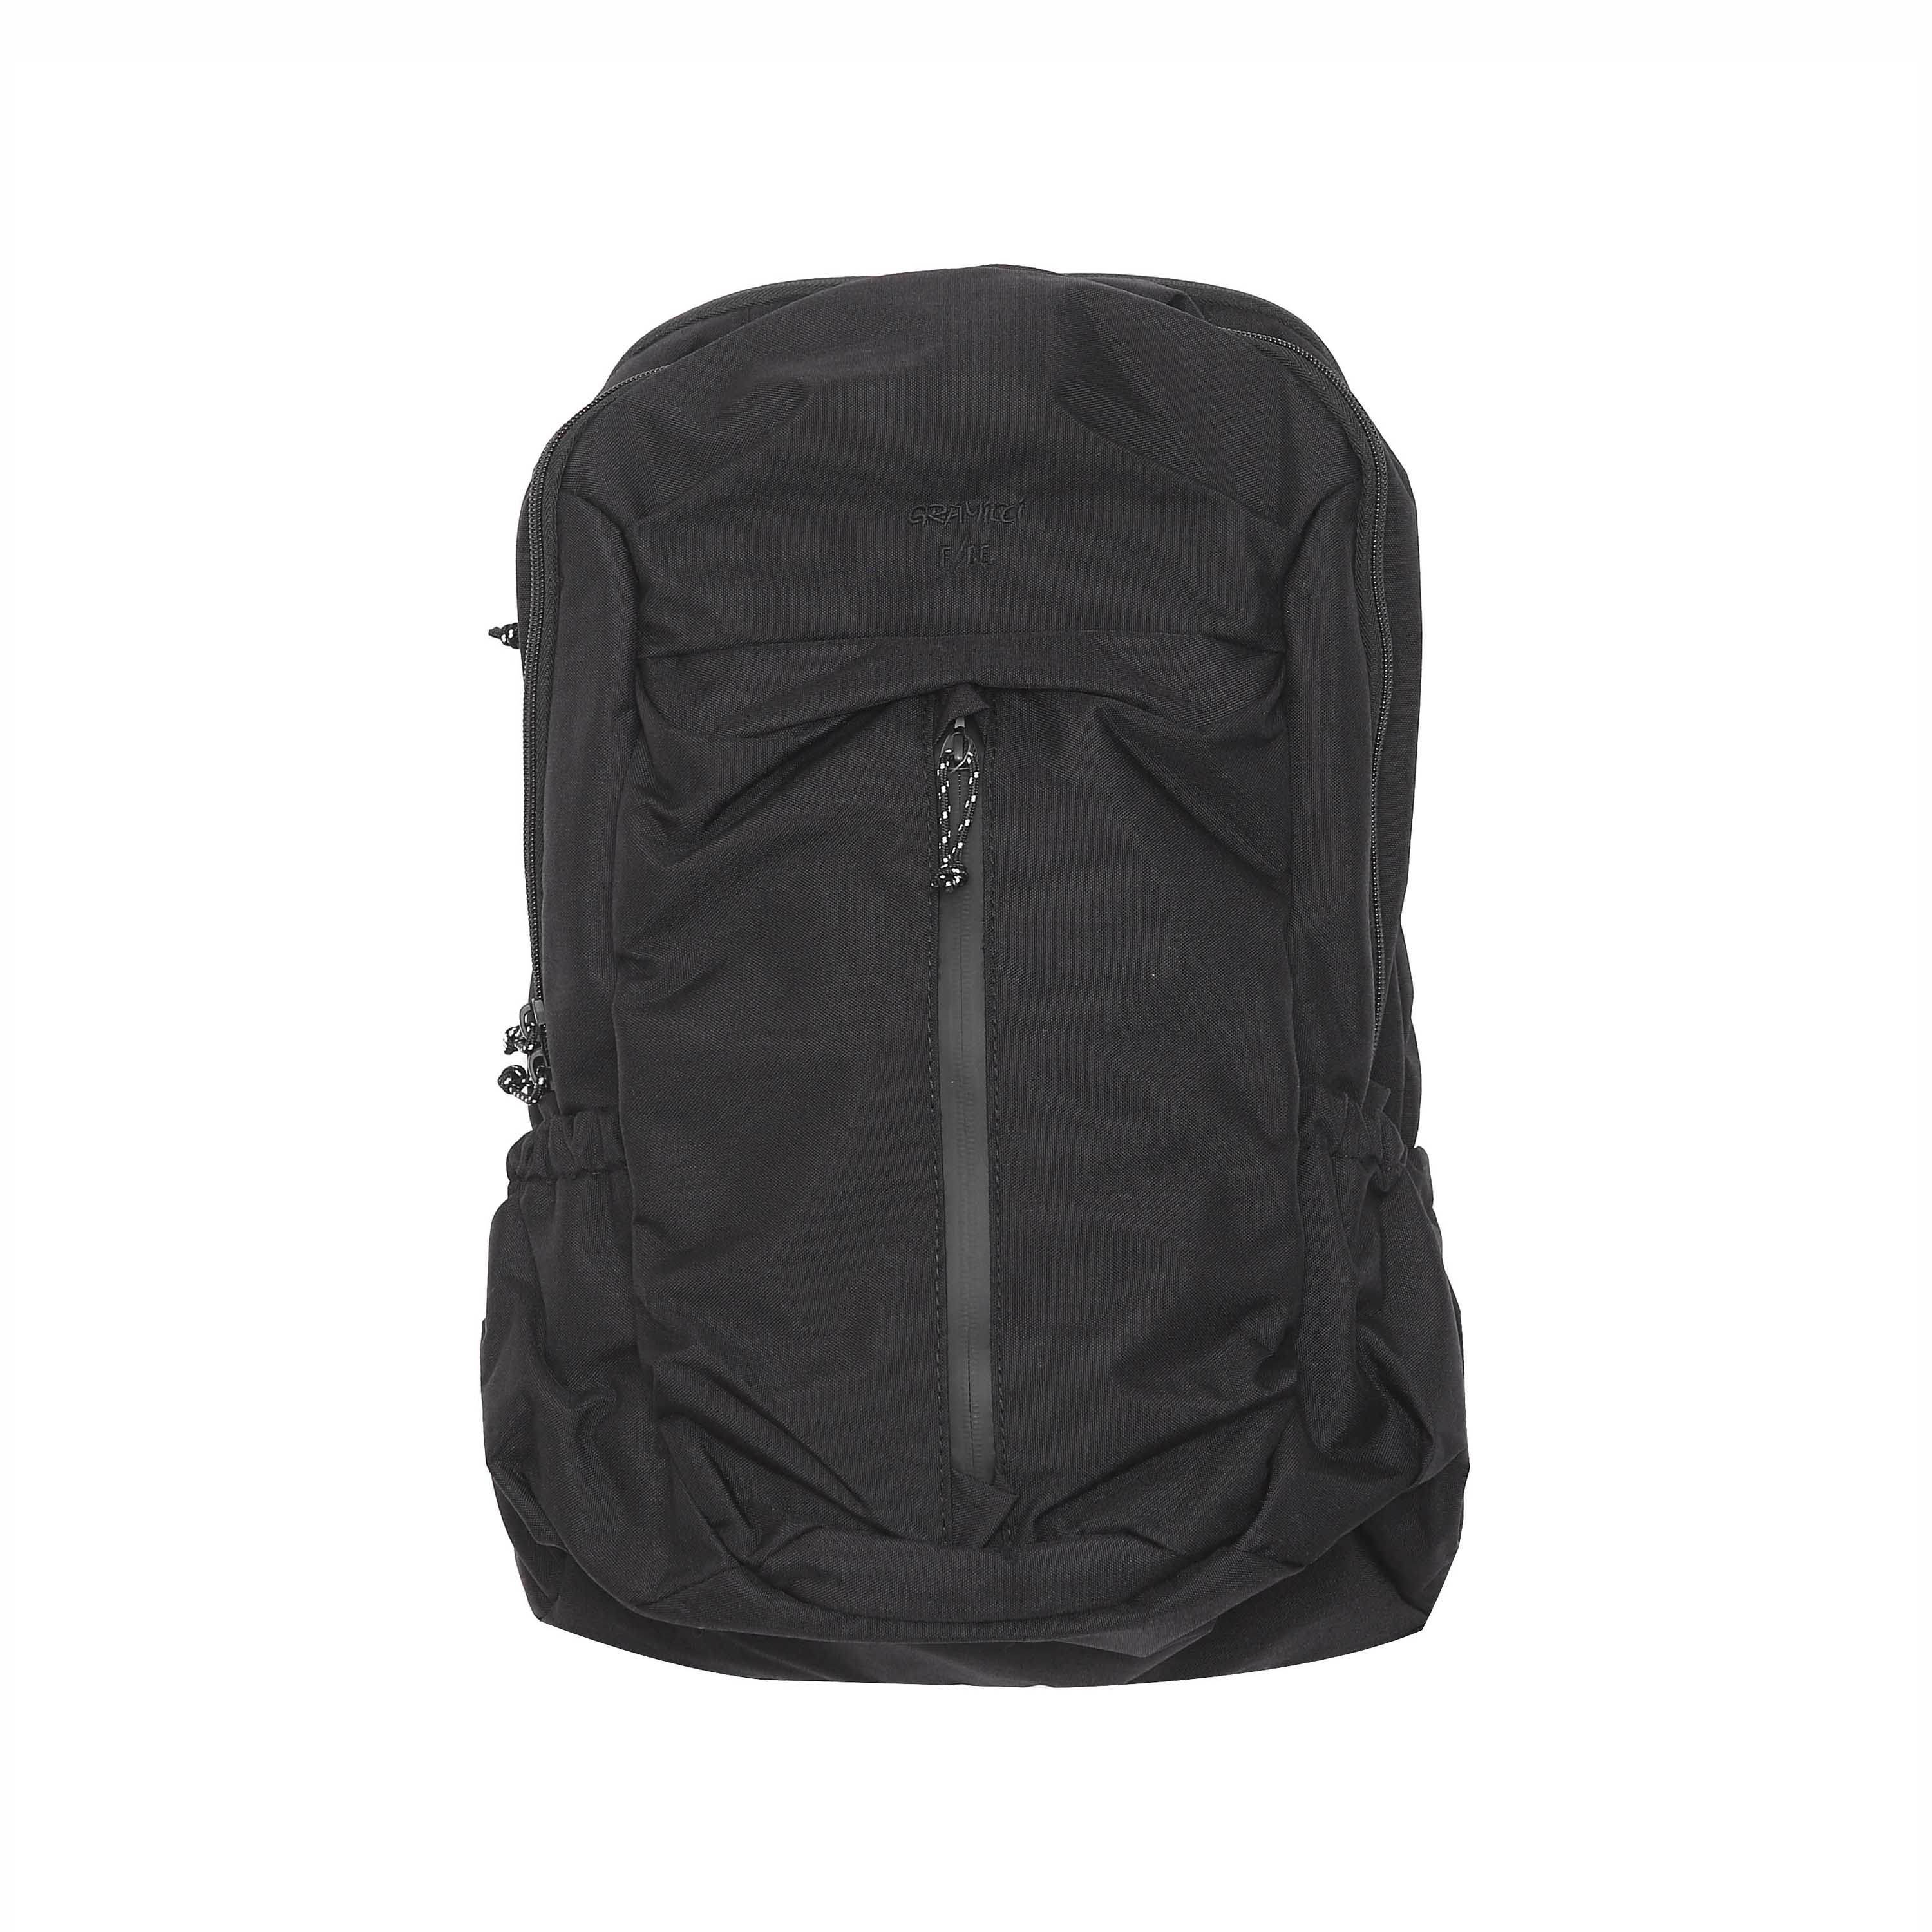 BY F/CE TECHNICAL TRAVEL PACK - BLACK